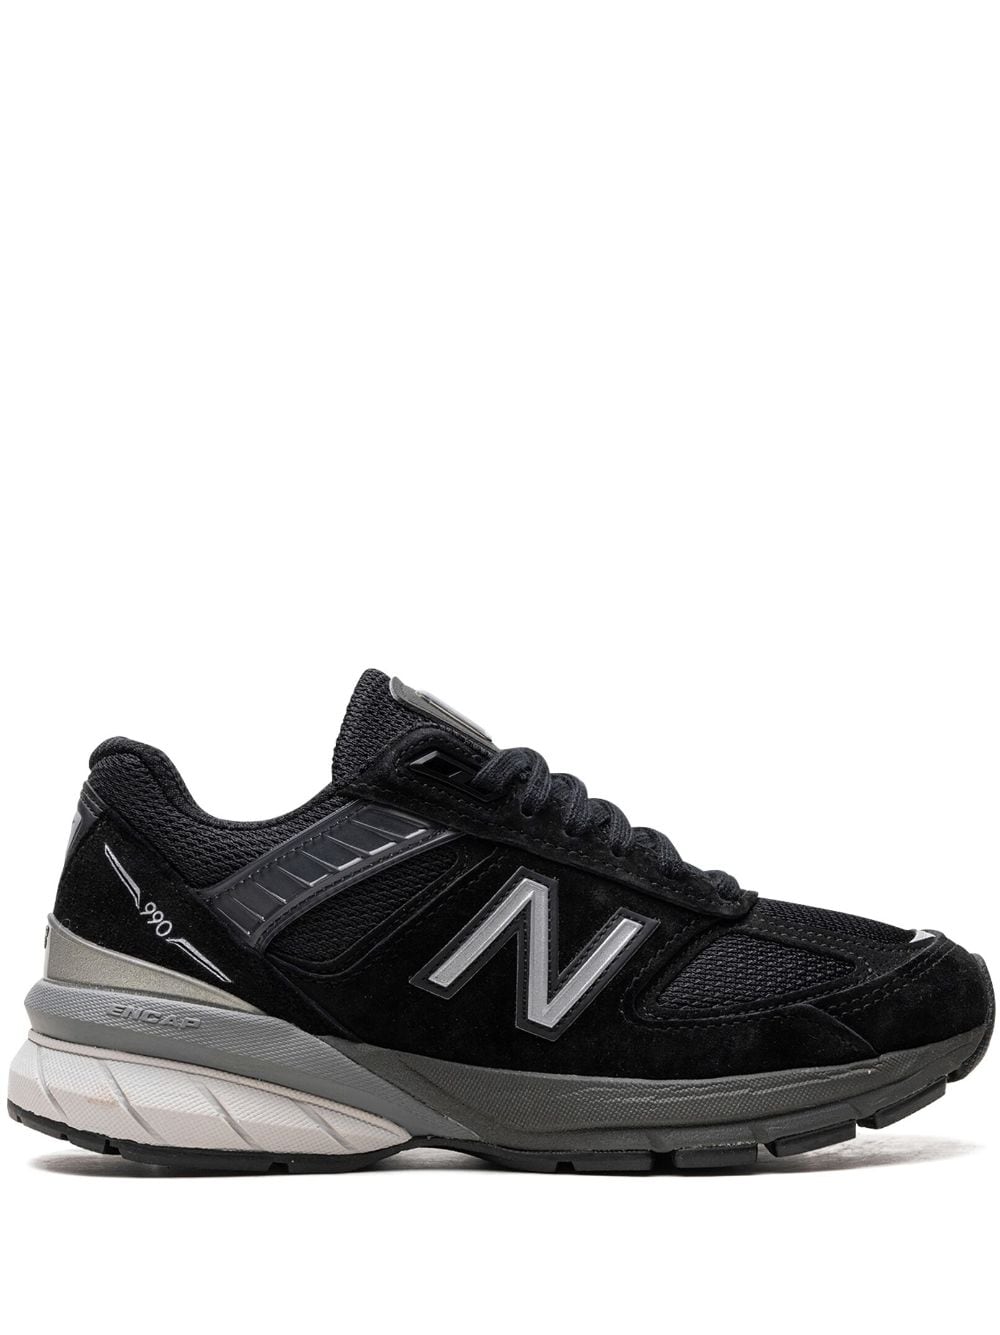 Image 1 of New Balance Made in USA 990v5 Core sneakers